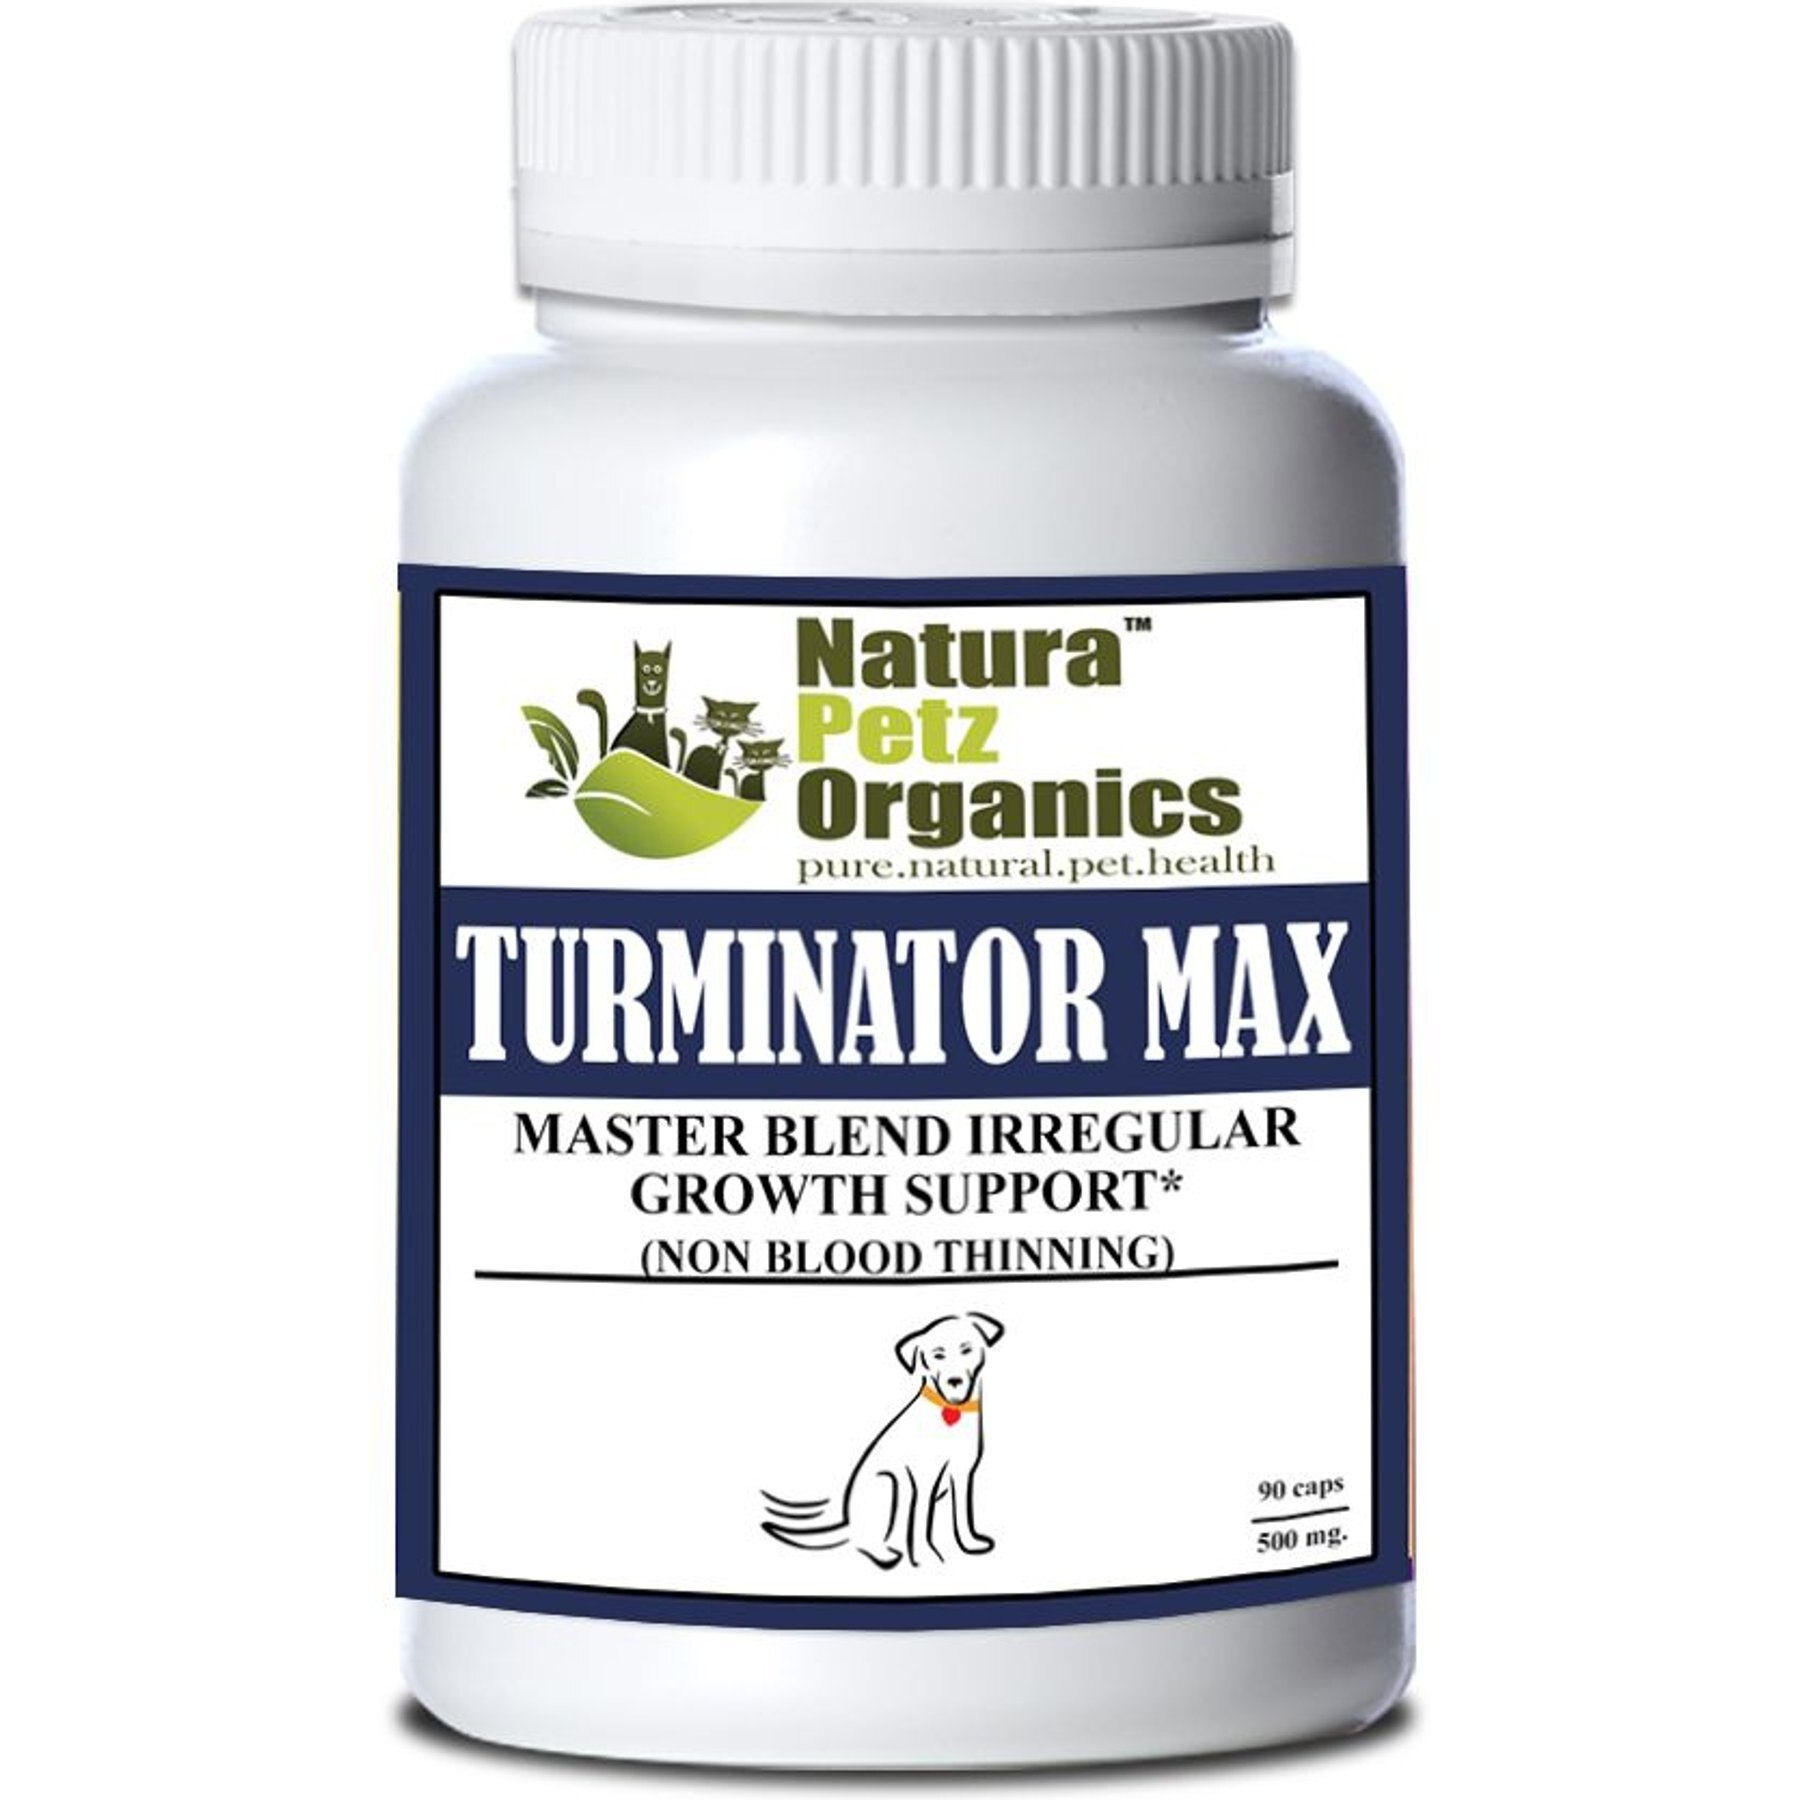 Turminator MAX* Master Blend Irregular Growth Support (Non Blood Thinning) for Dogs & Cats*